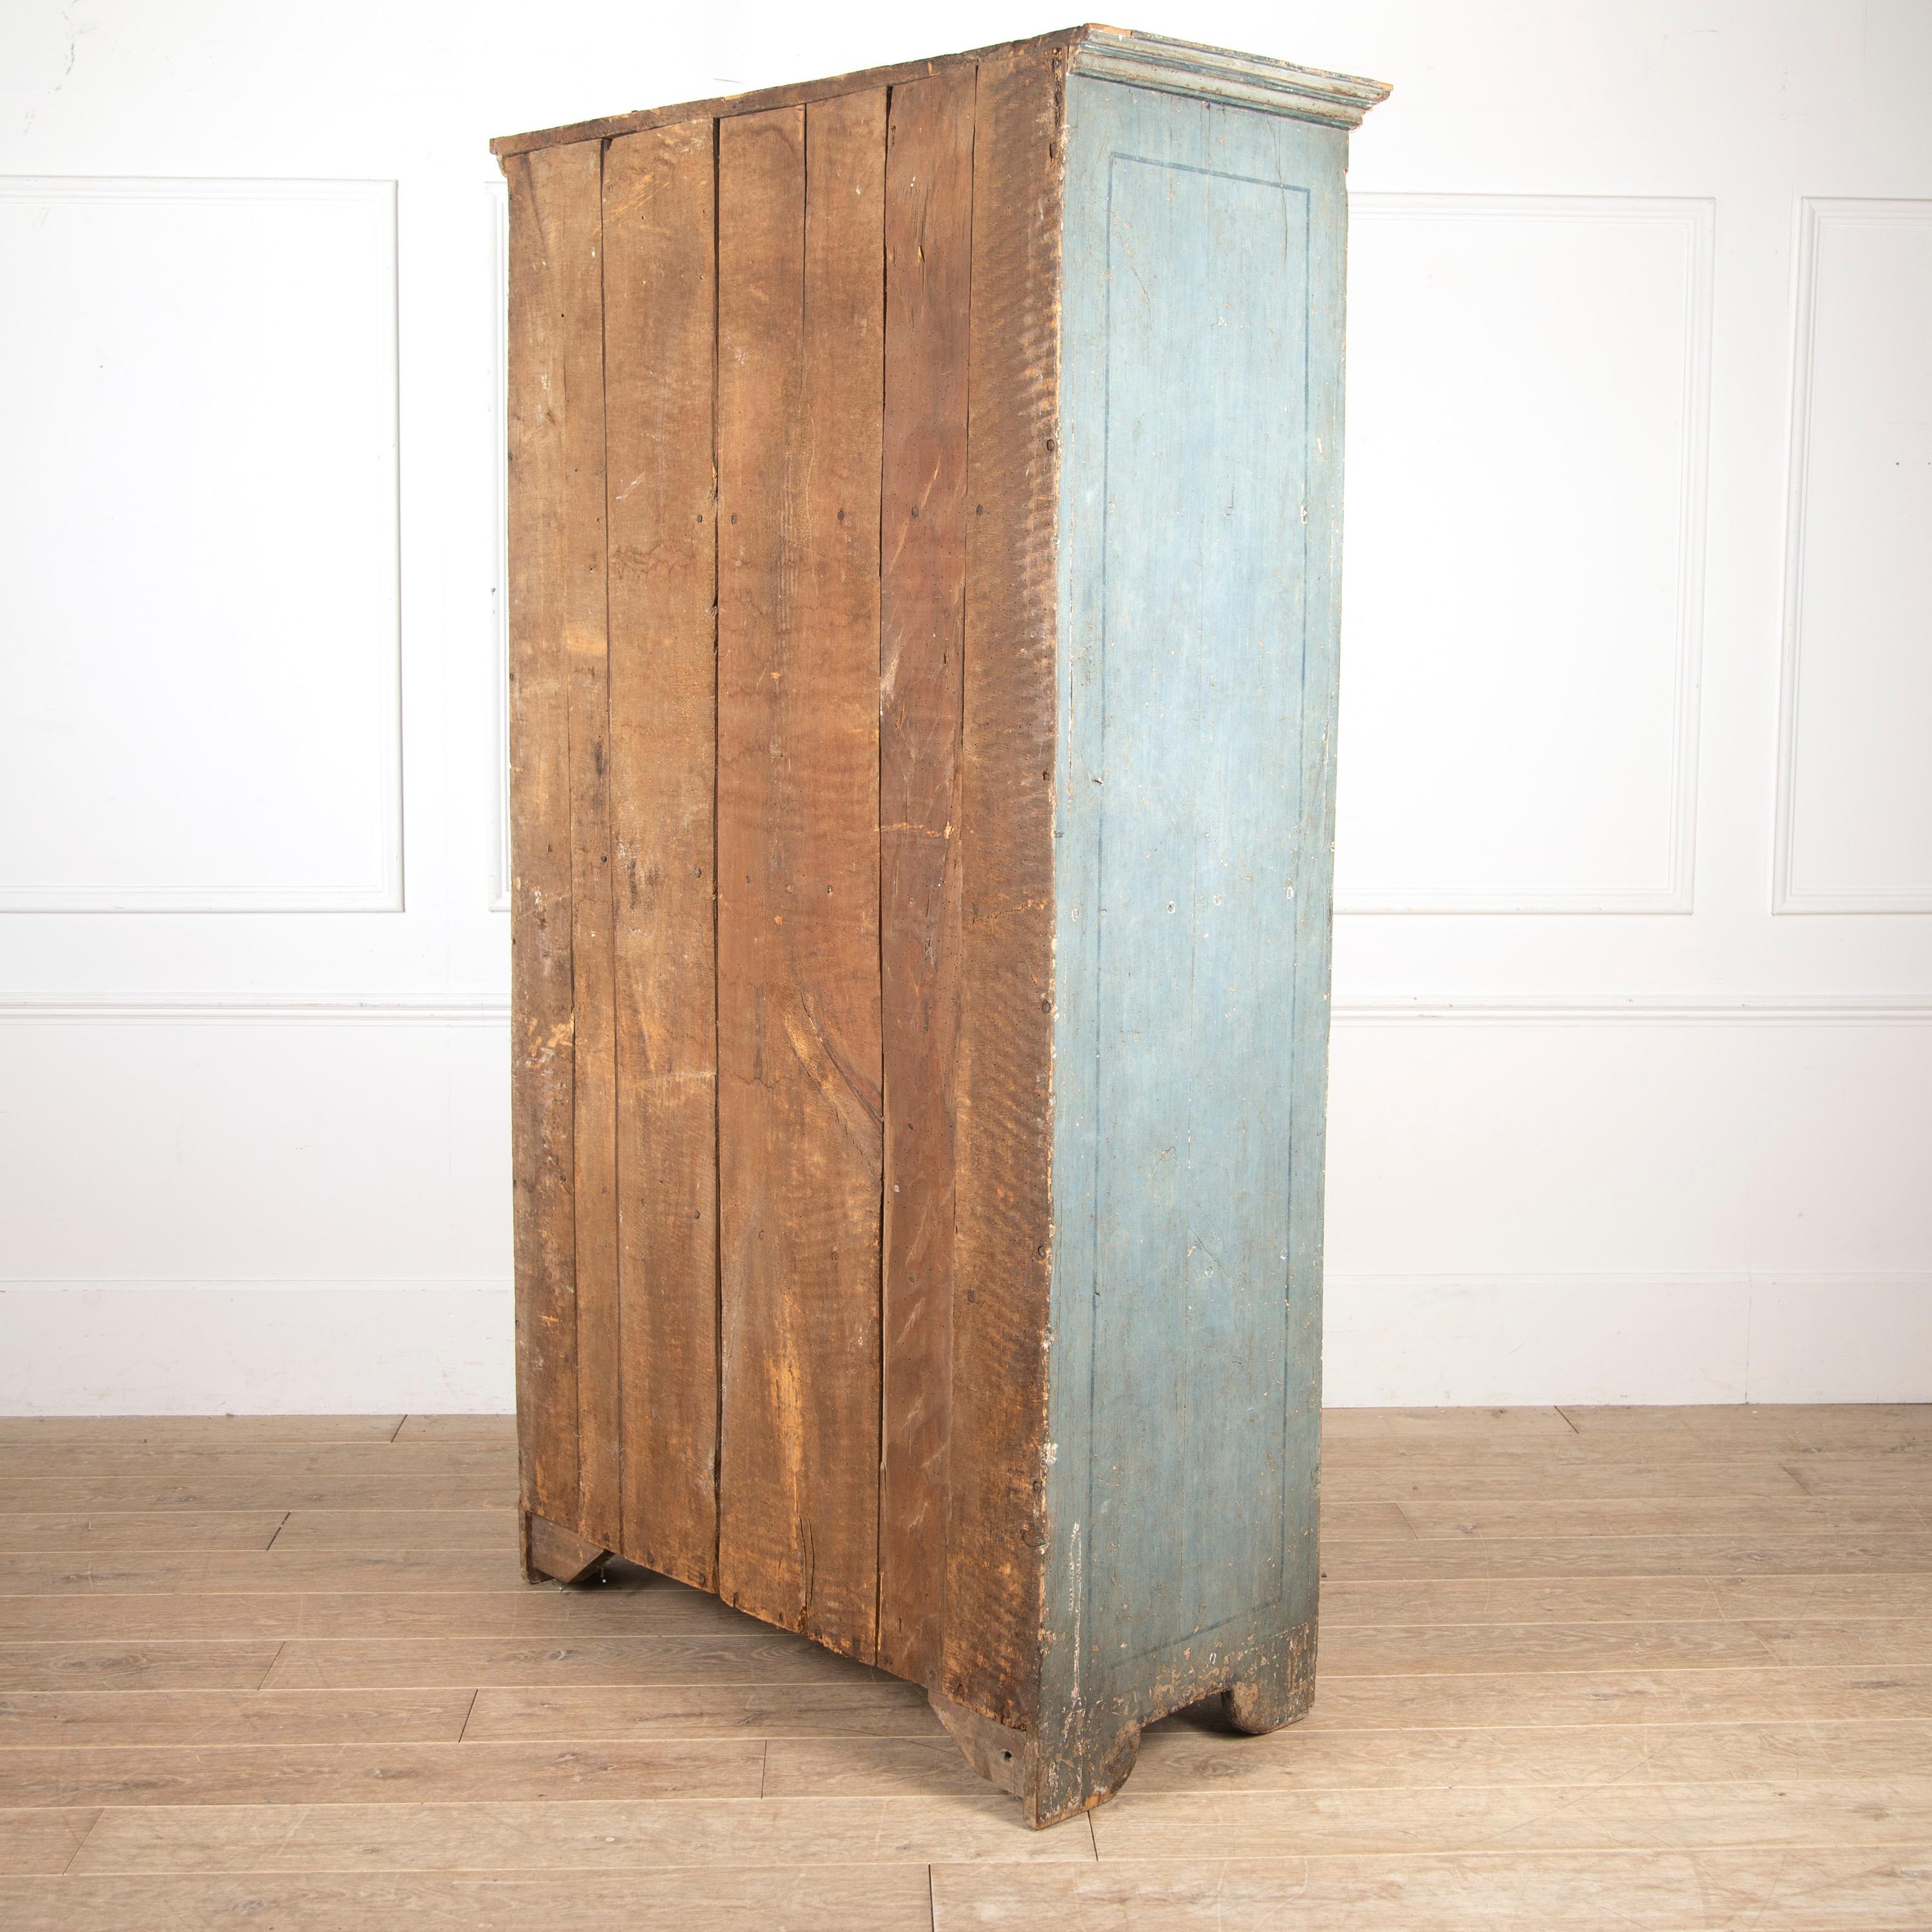 Painted 18th century Italian cupboard.

The cupboard retains its original paintwork, has a moulded cornice above a pair of doors. Features a painted classical scene, and is supported on quadrant feet.

A superb cupboard that is both stylish and